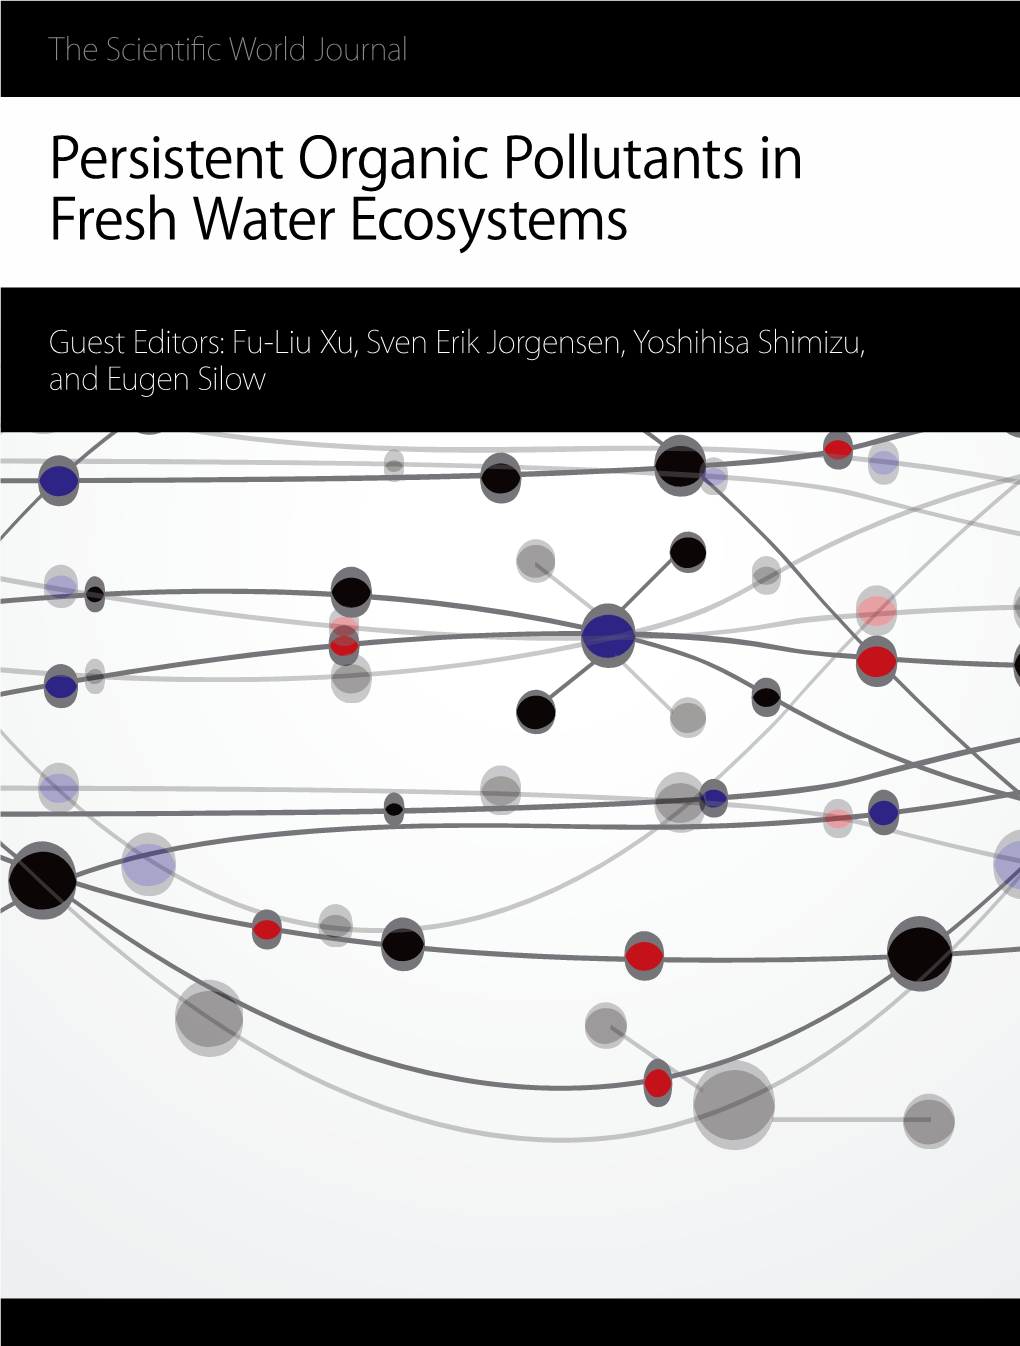 Persistent Organic Pollutants in Fresh Water Ecosystems